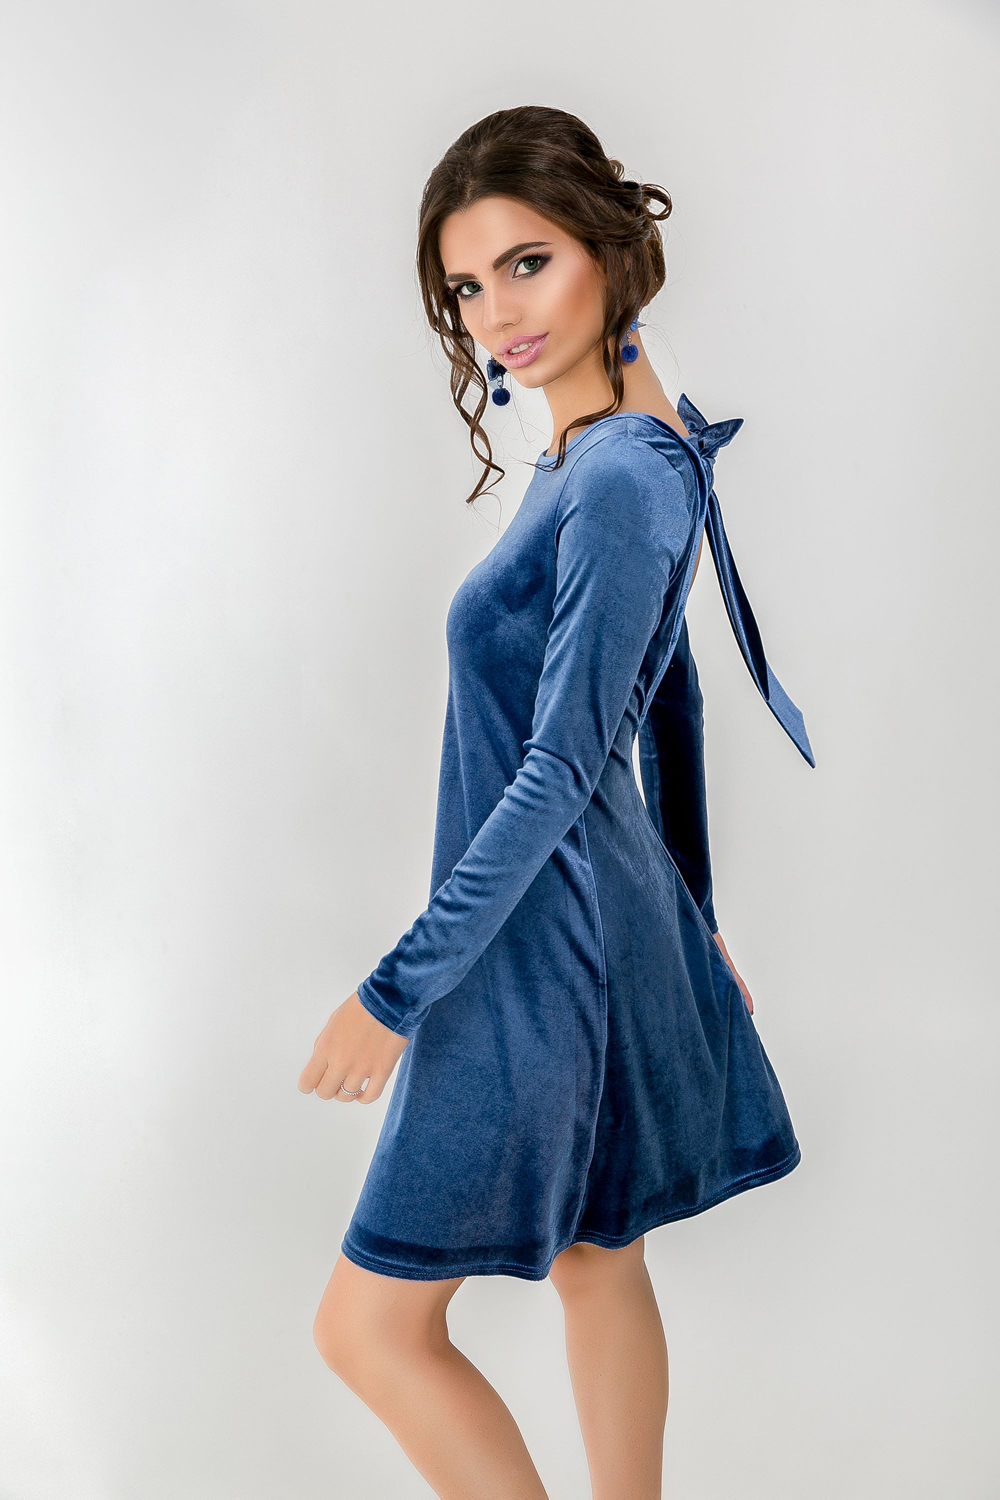 Blue velour dress with cut-out back and bow